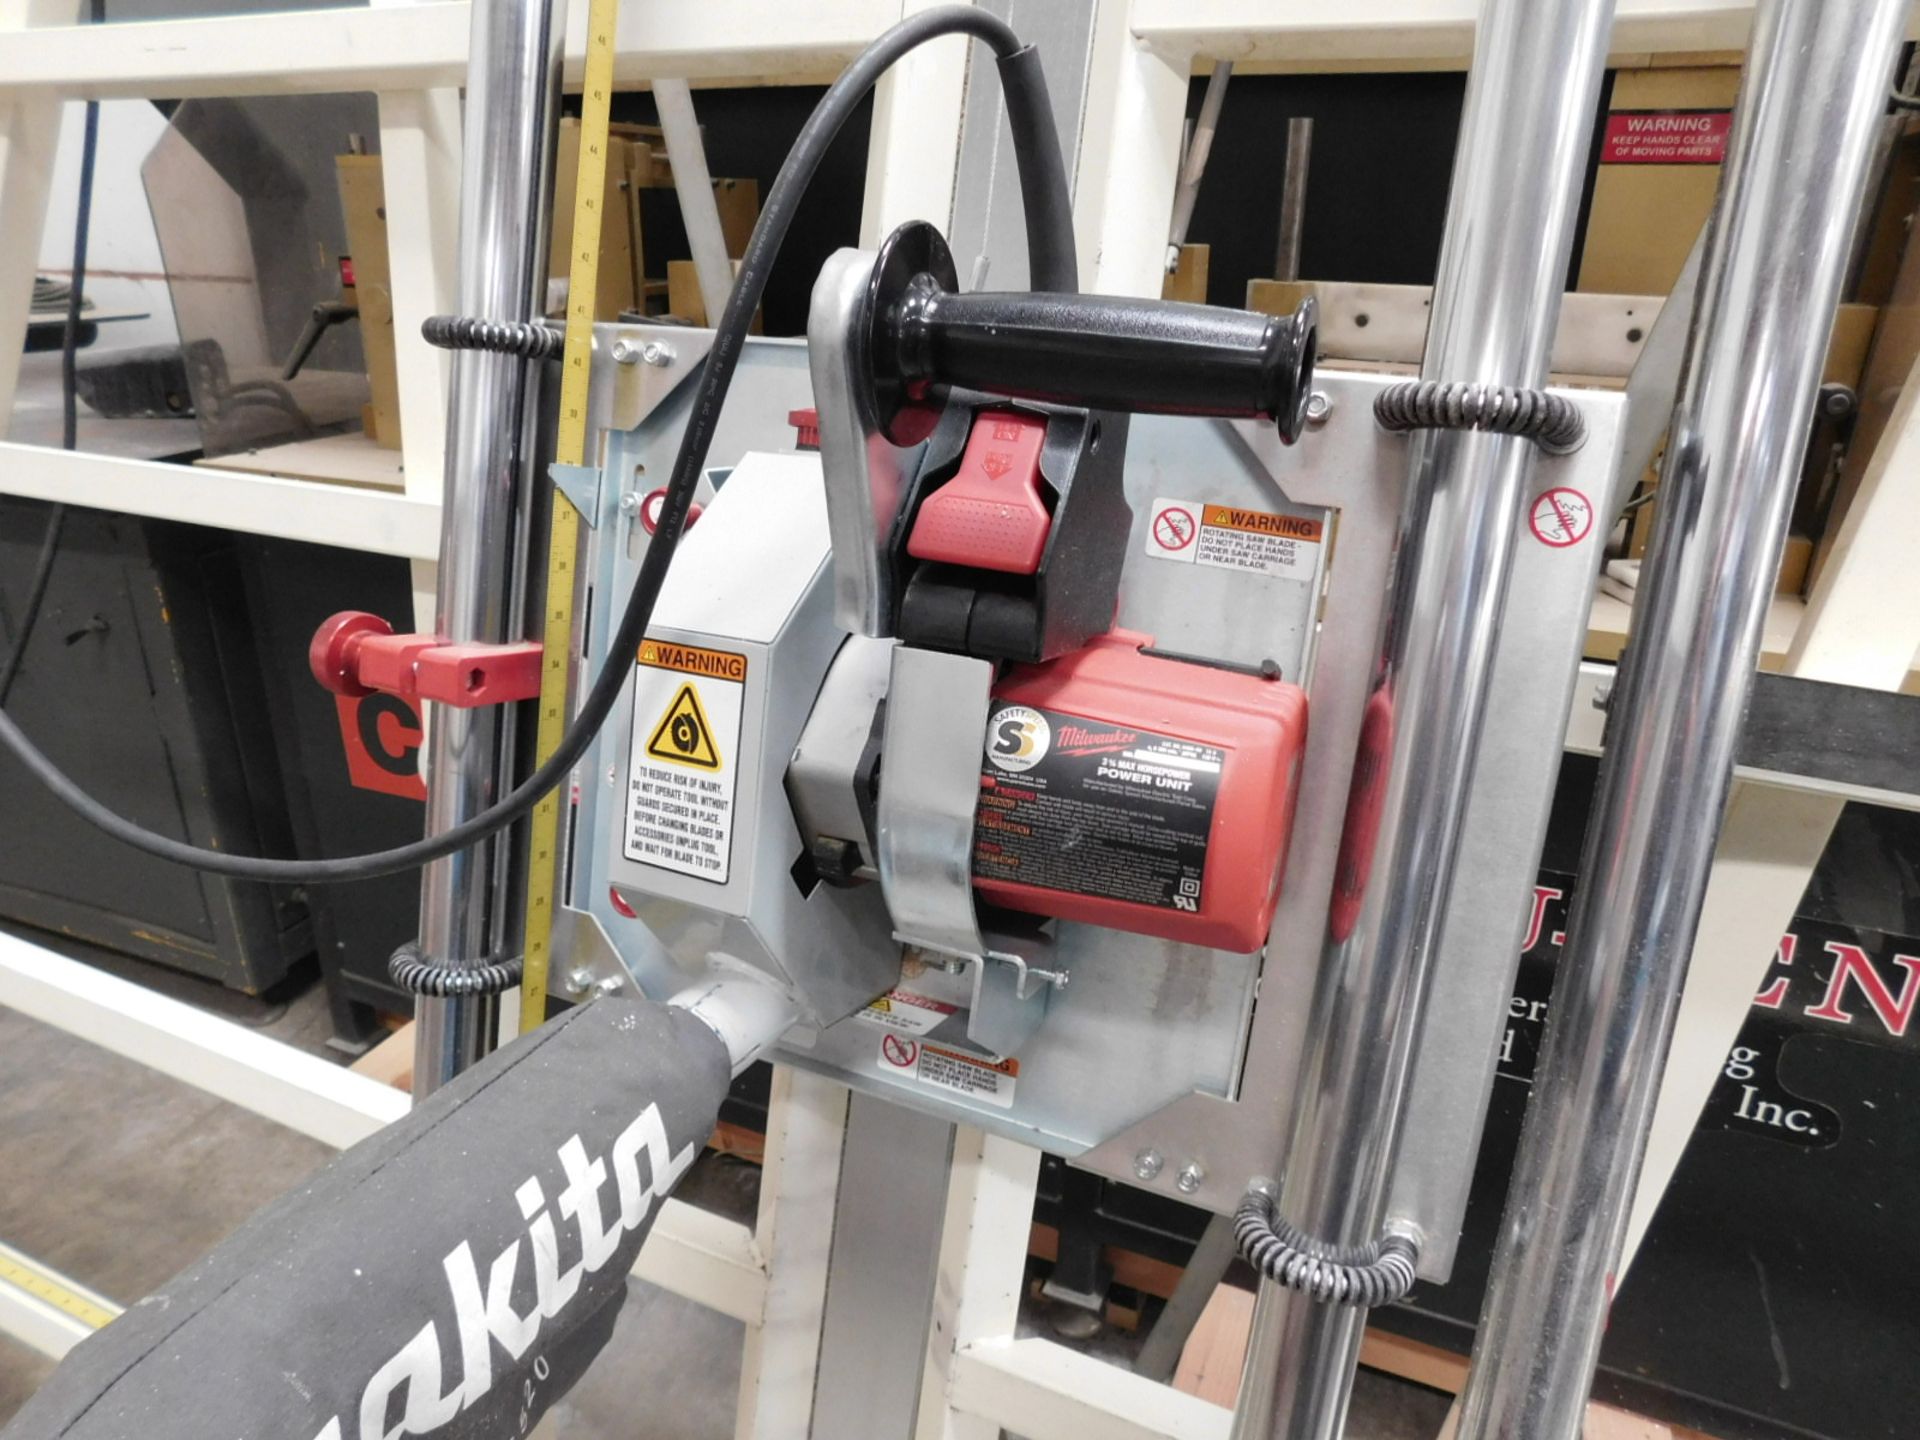 SAFETY SPEED VERTICAL PANEL SAW, MODEL H6, CUTS UP TO 10' X 6', UP TO 1.75" THICK, W/ MILWAUKEE 3- - Image 2 of 7